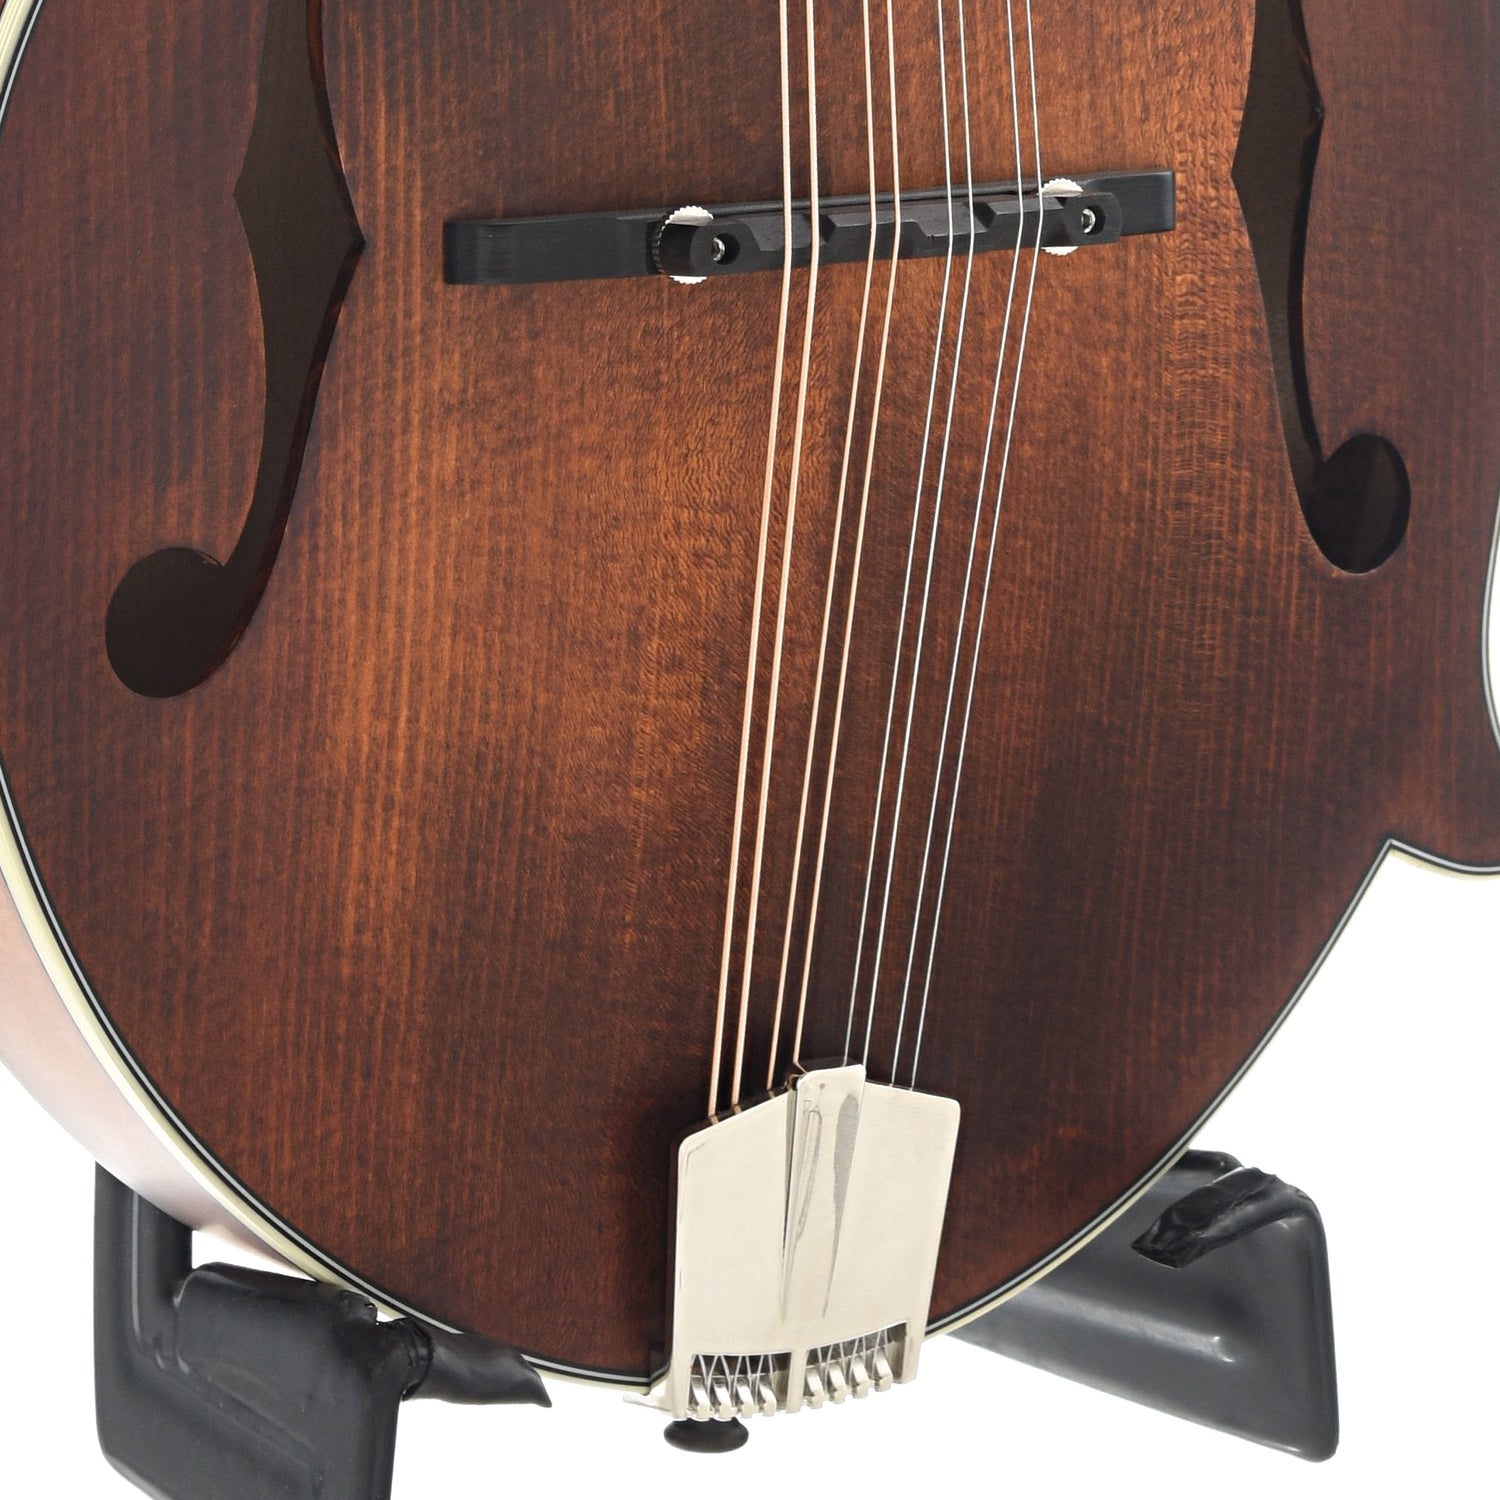 Tailpiece of Eastman MD315 Classic Mandolin 